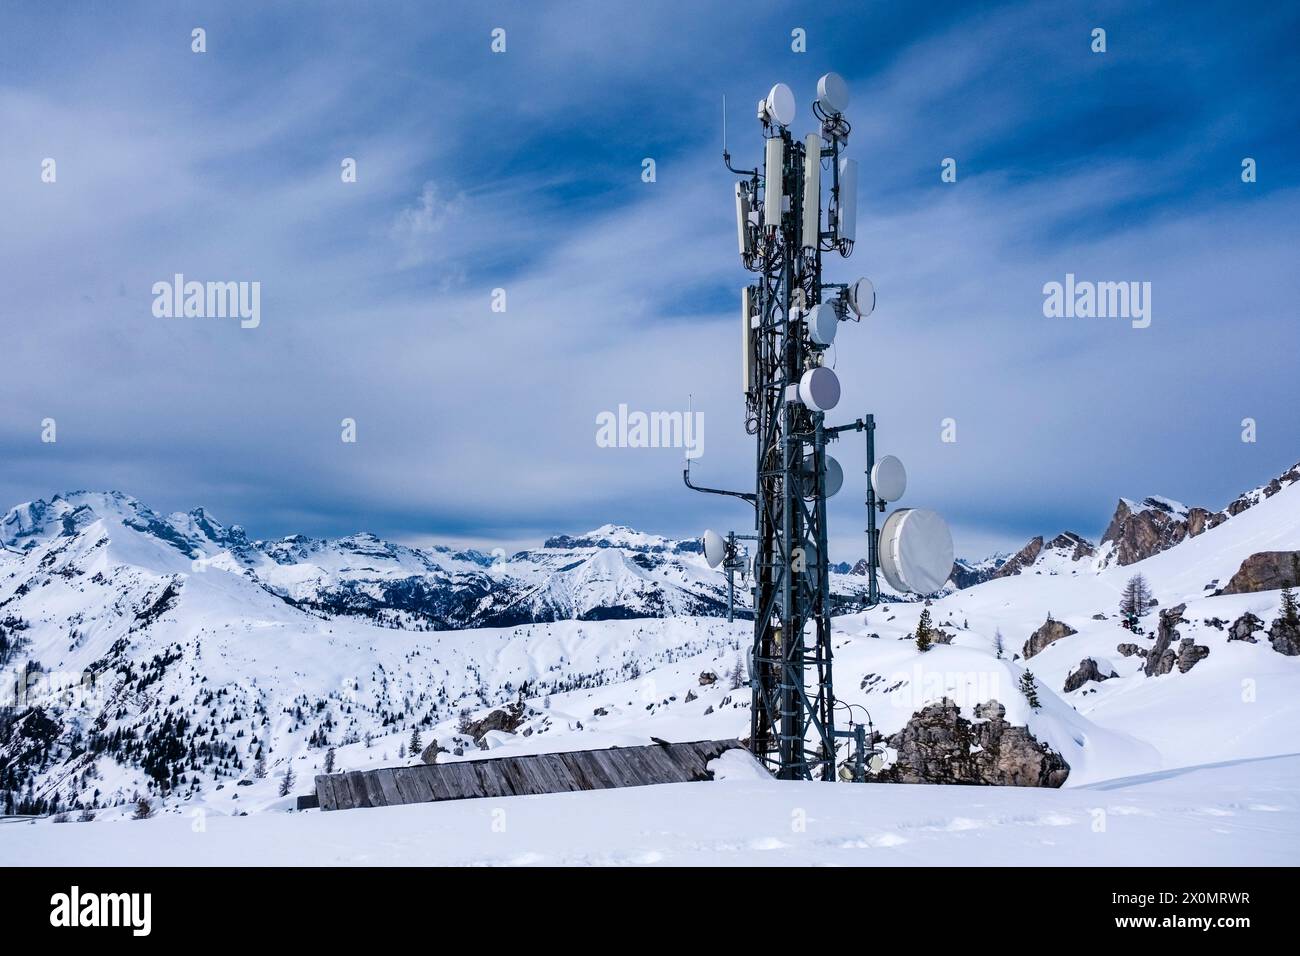 Snow-covered slopes of alpine Dolomite landscape with a telecommunications station above Giau pass in winter. Stock Photo